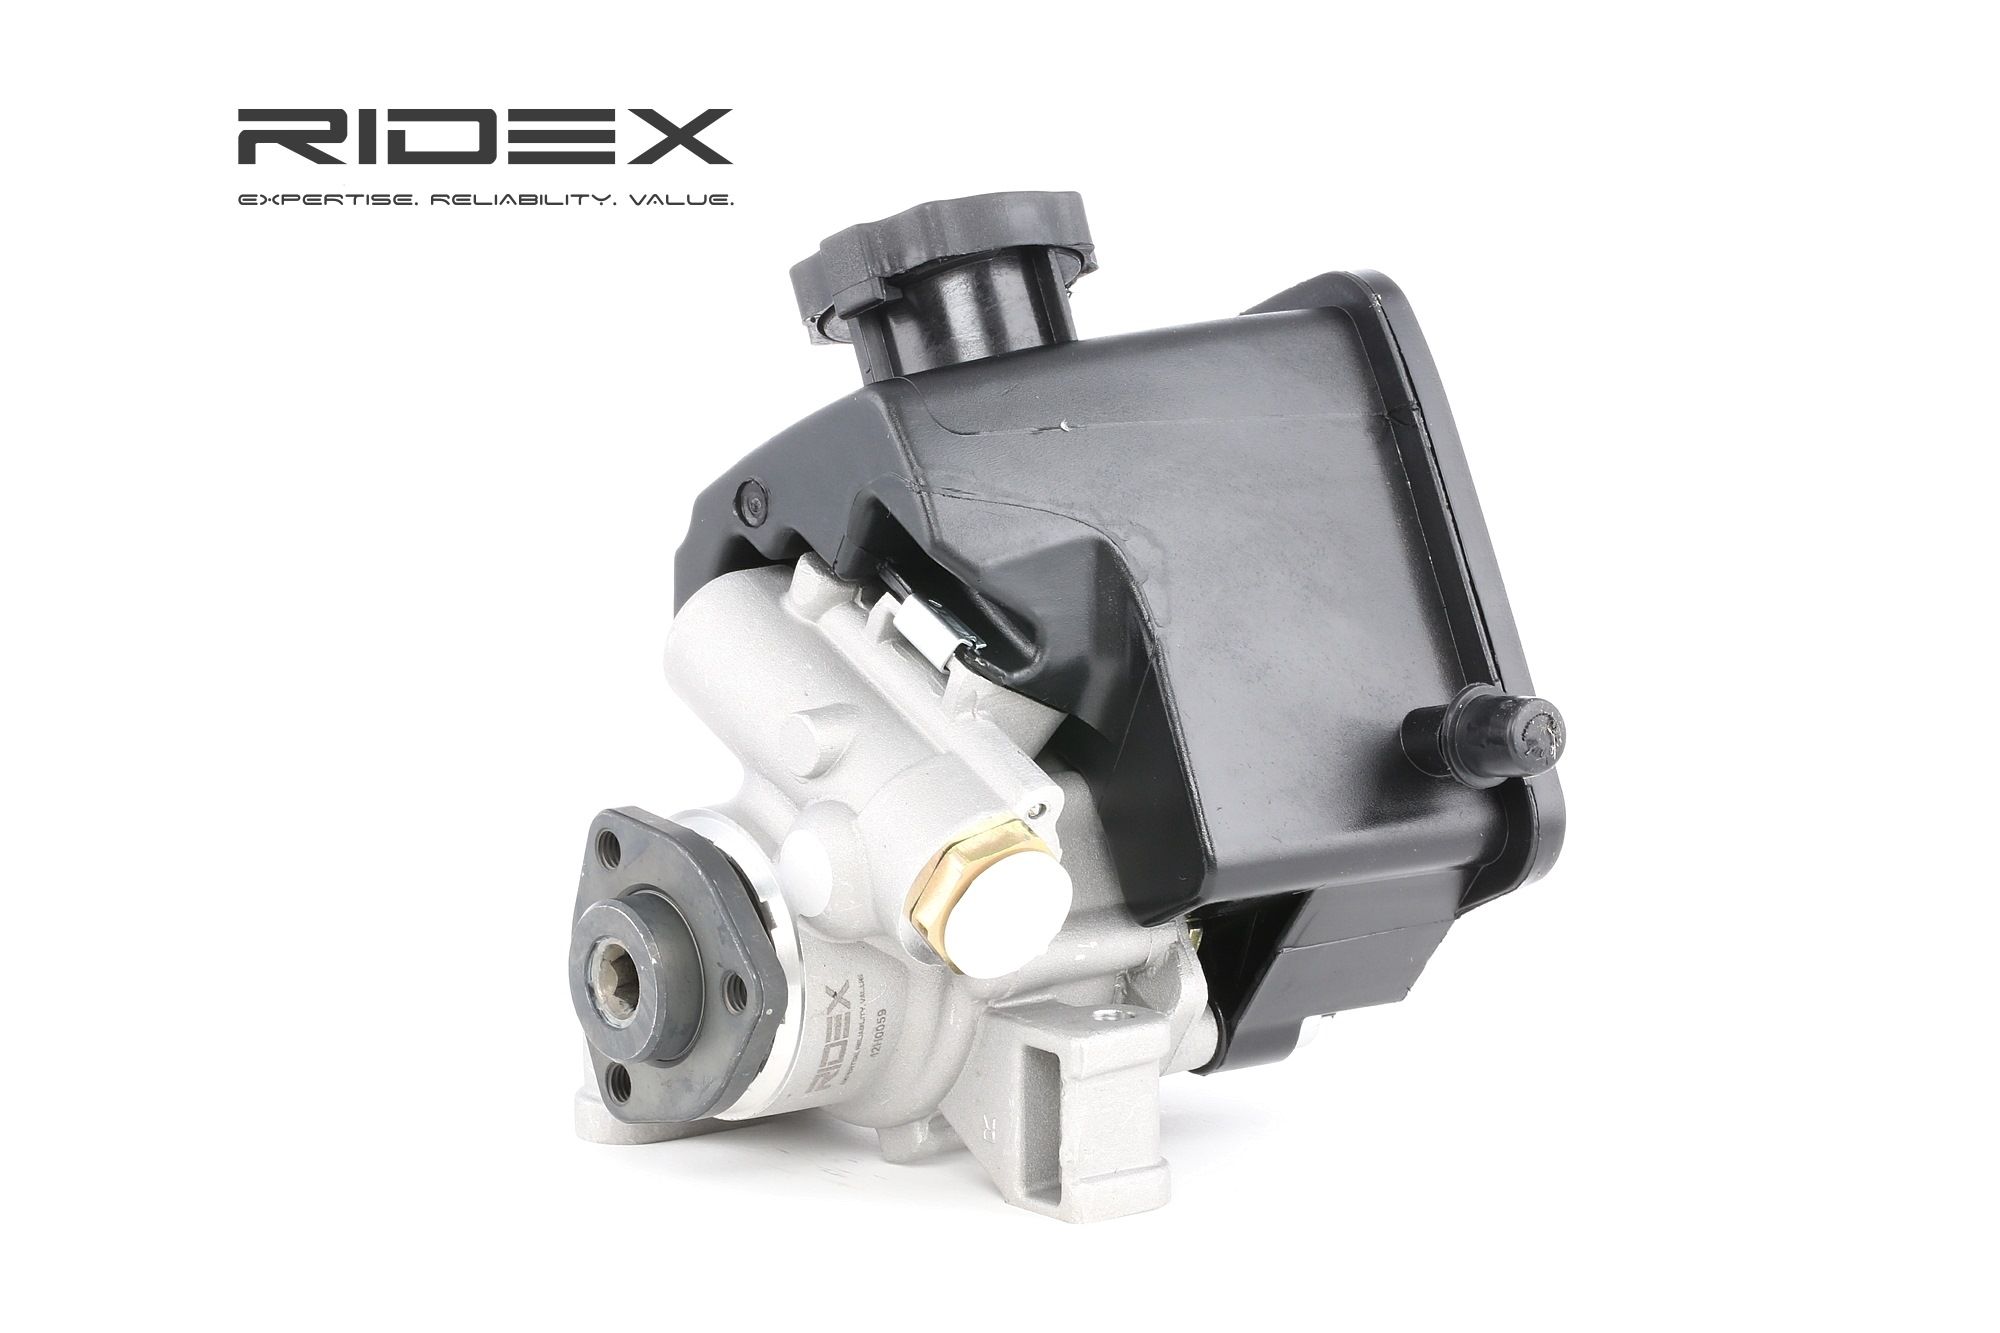 Image of RIDEX Power Steering Pump MERCEDES-BENZ 12H0059 0024667201,0024667301,0024667401 Steering Pump,EHPS,EHPS Pump,Hydraulic Pump, steering system